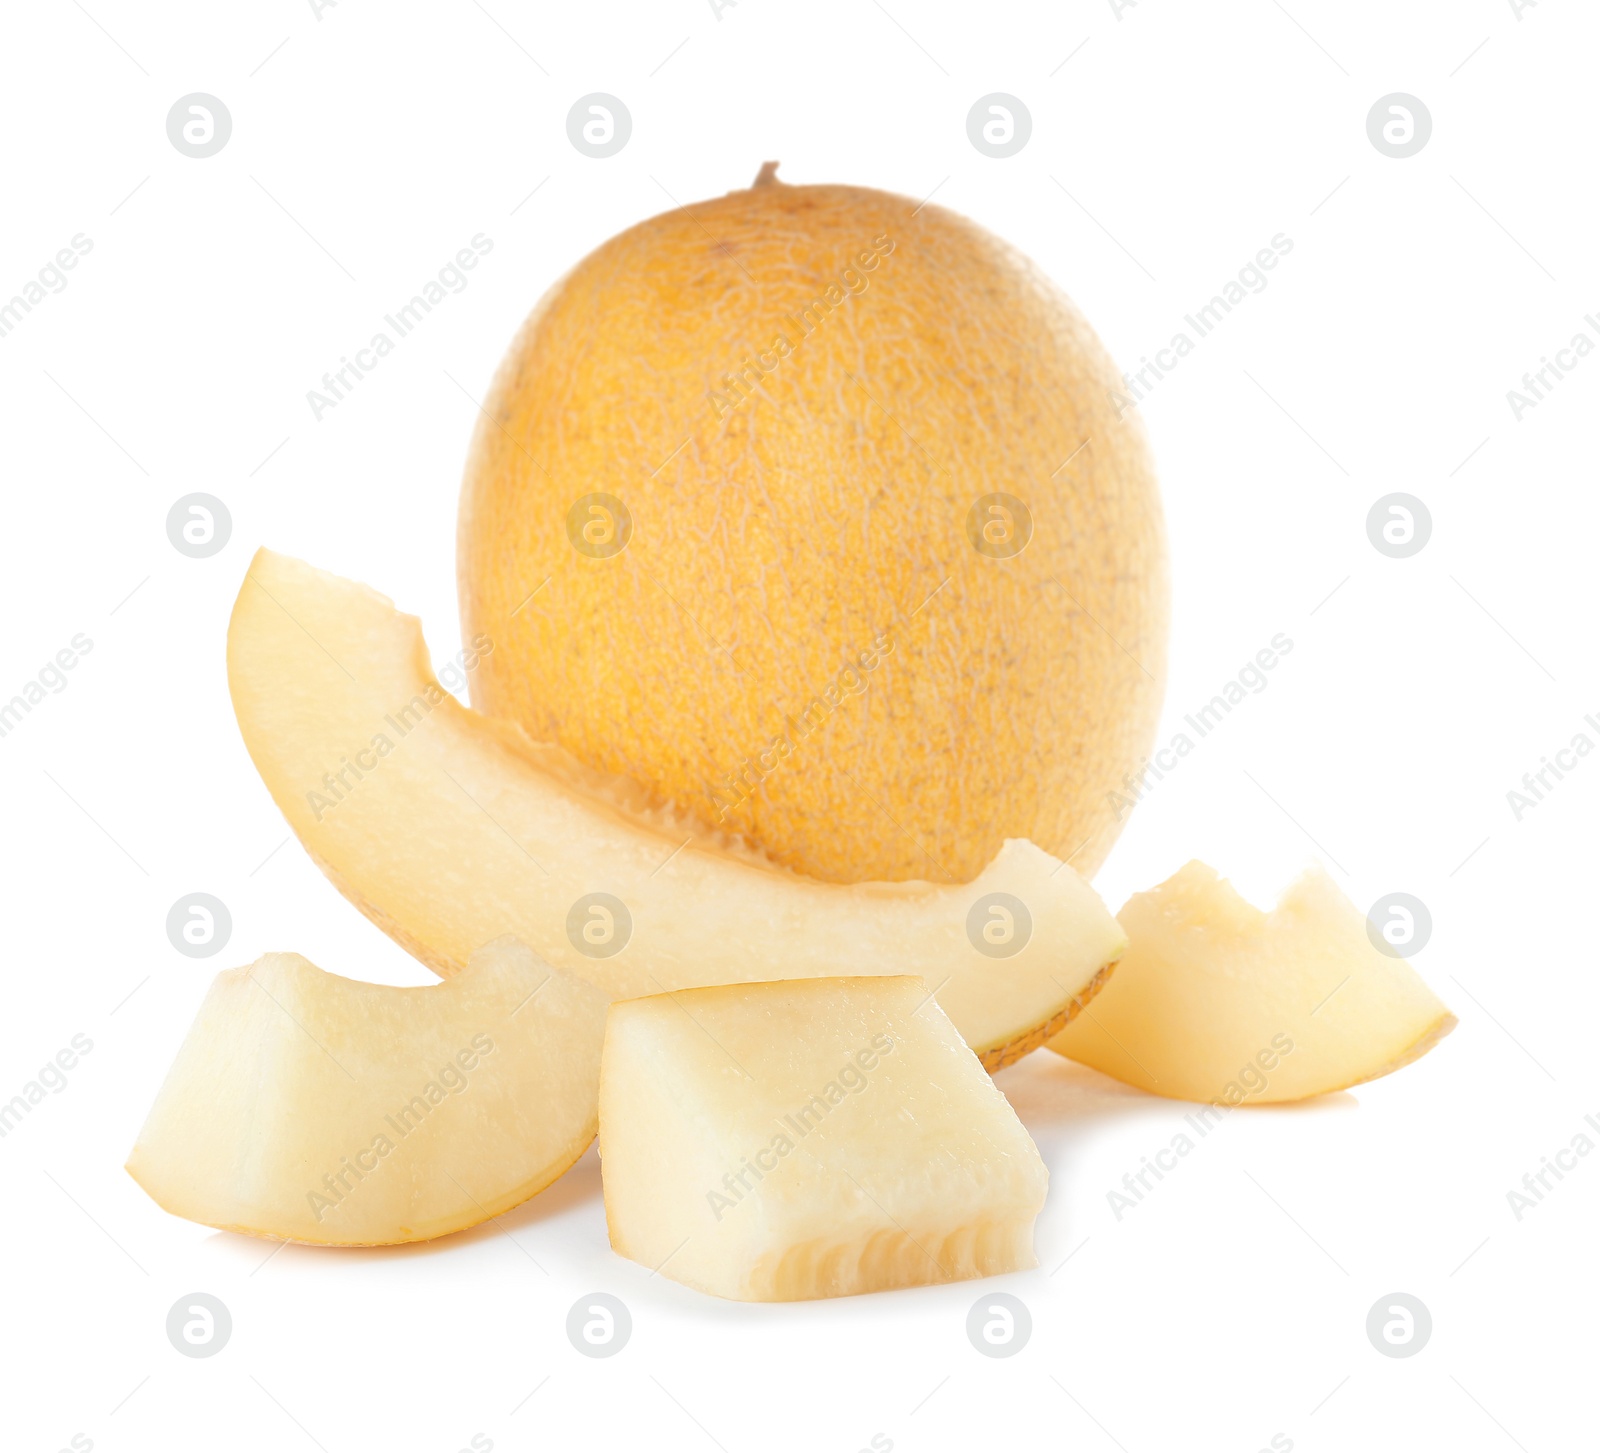 Photo of Whole and sliced tasty ripe melons on white background